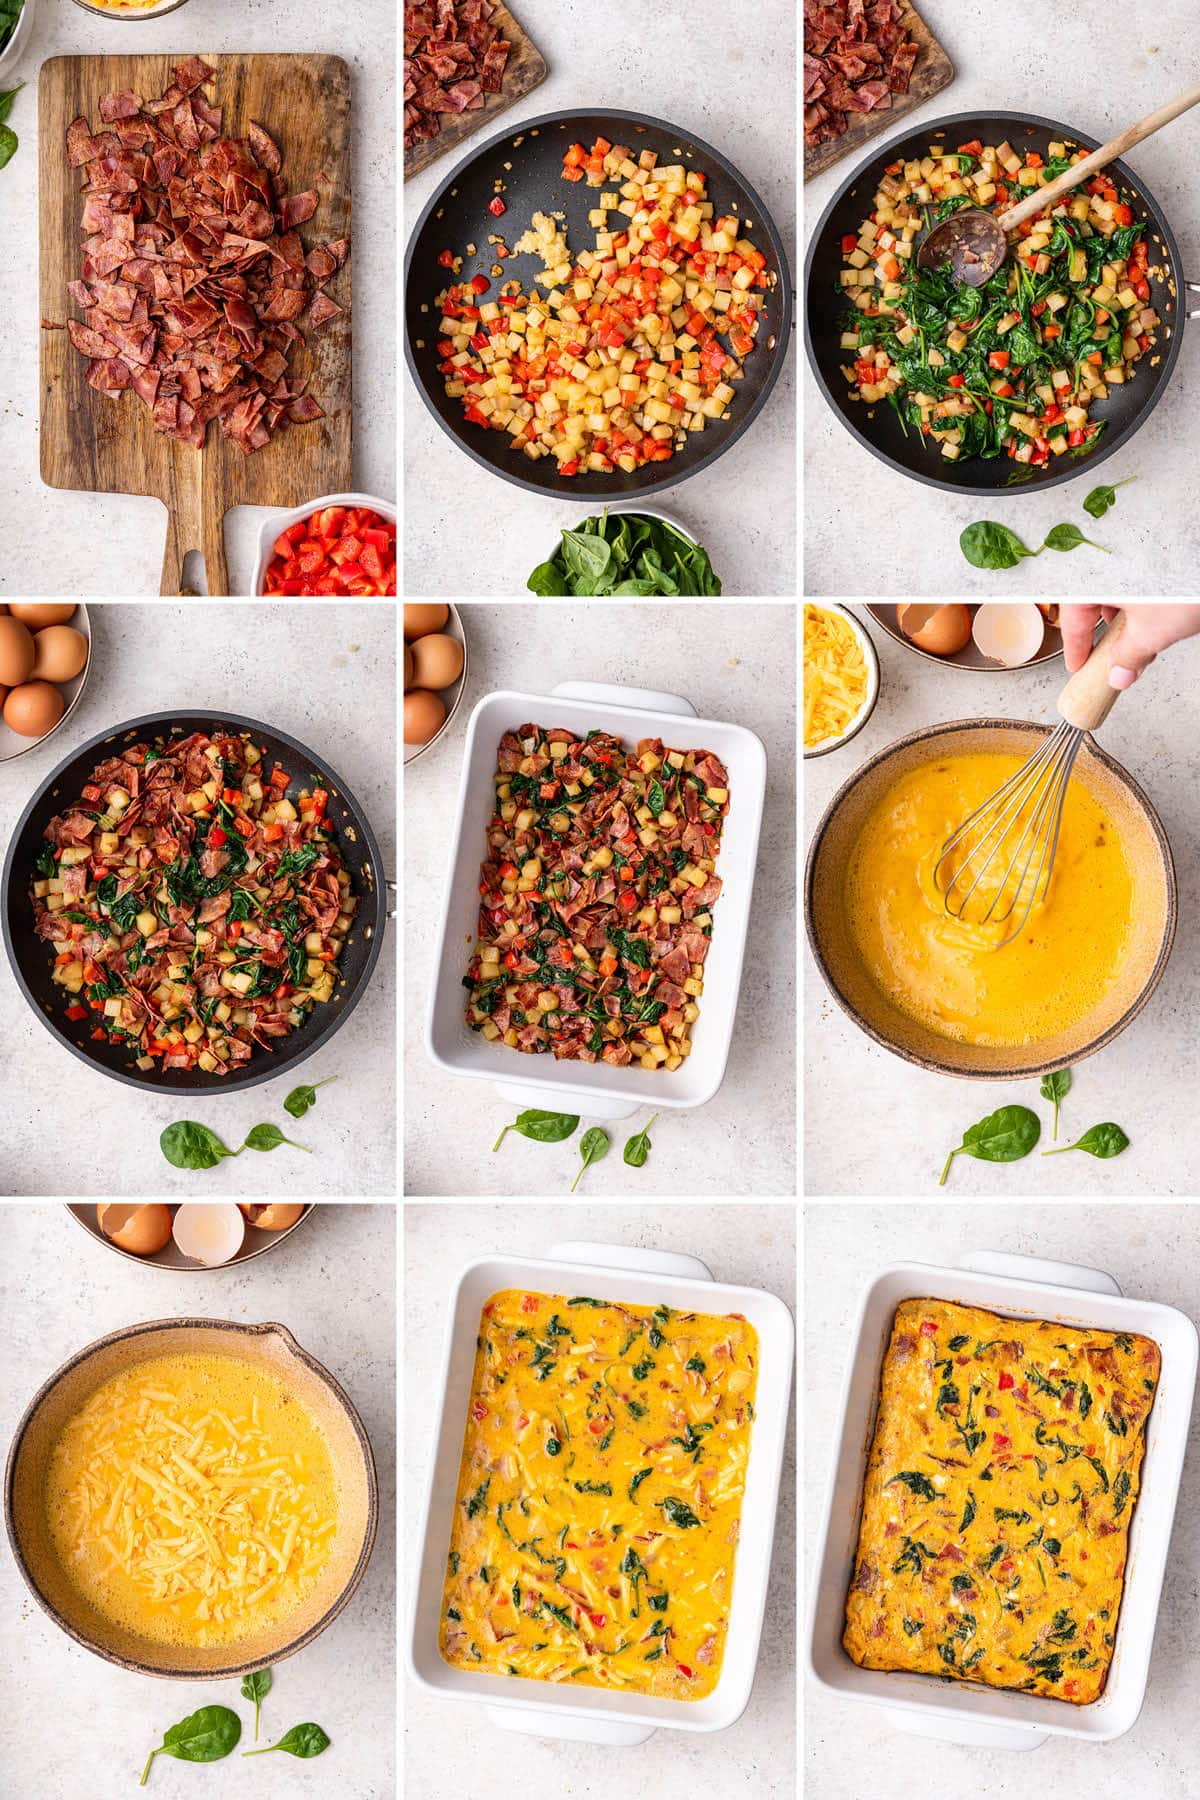 Collage of 9 photos showing how to make Make-Ahead Breakfast Casserole: chopping turkey bacon, cooking potatoes, peppers and spinach in a skilled, adding to a casserole dish, whisking eggs and cheese and pouring over the ingredients. Then baking the breakfast casserole.